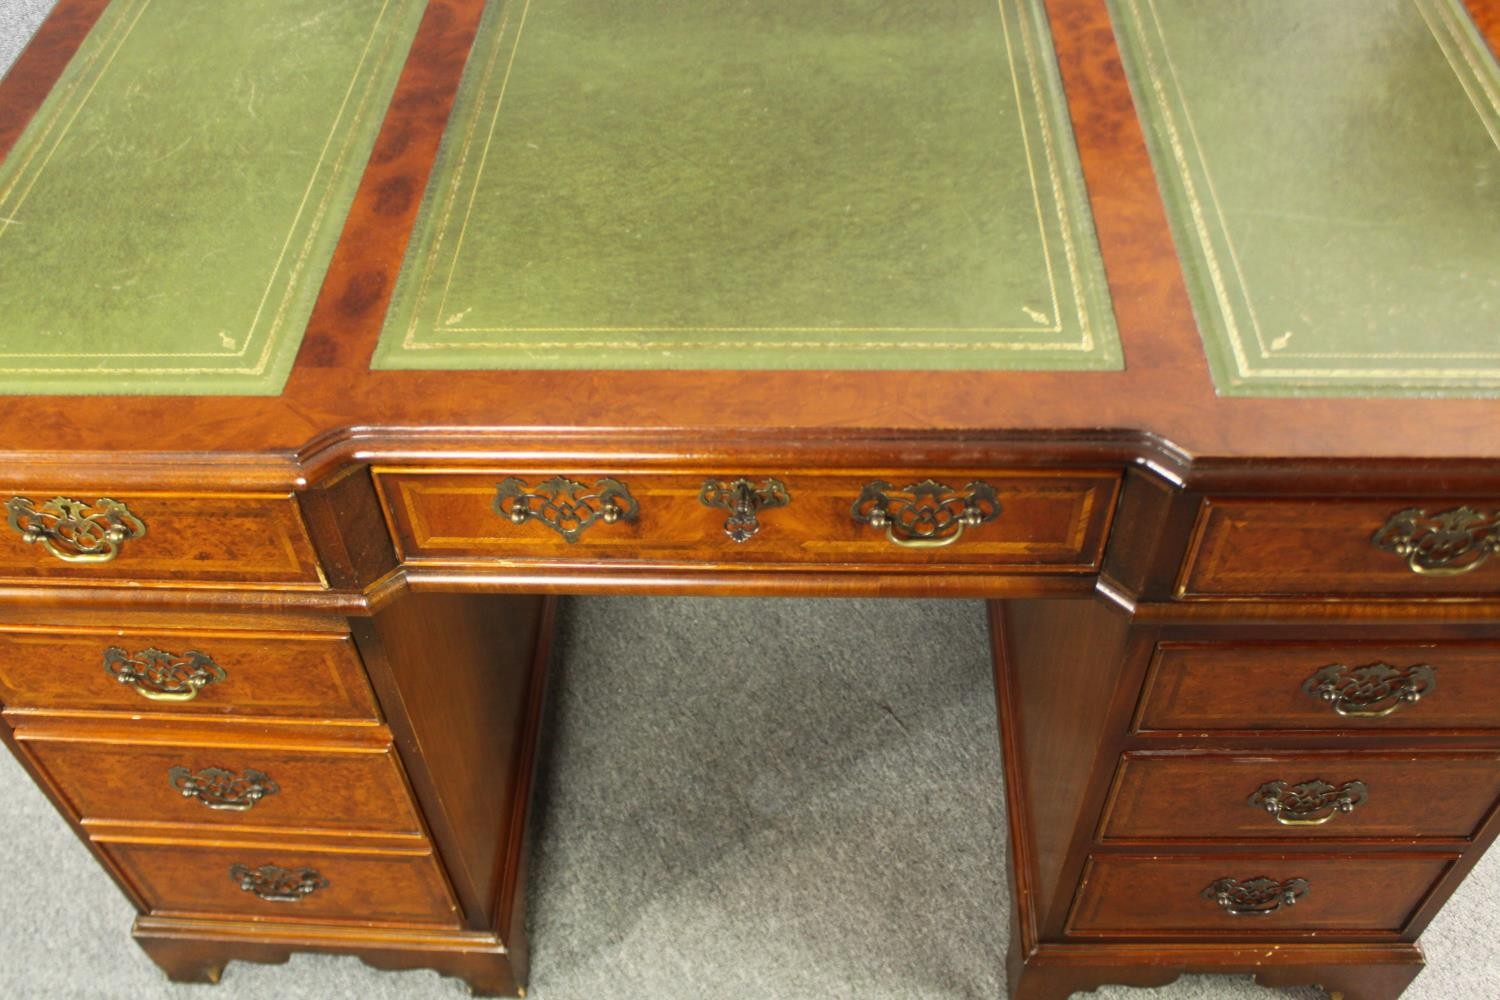 A burr walnut and satinwood inlaid Georgian style pedestal desk with inset leather top, 20th century - Image 6 of 9